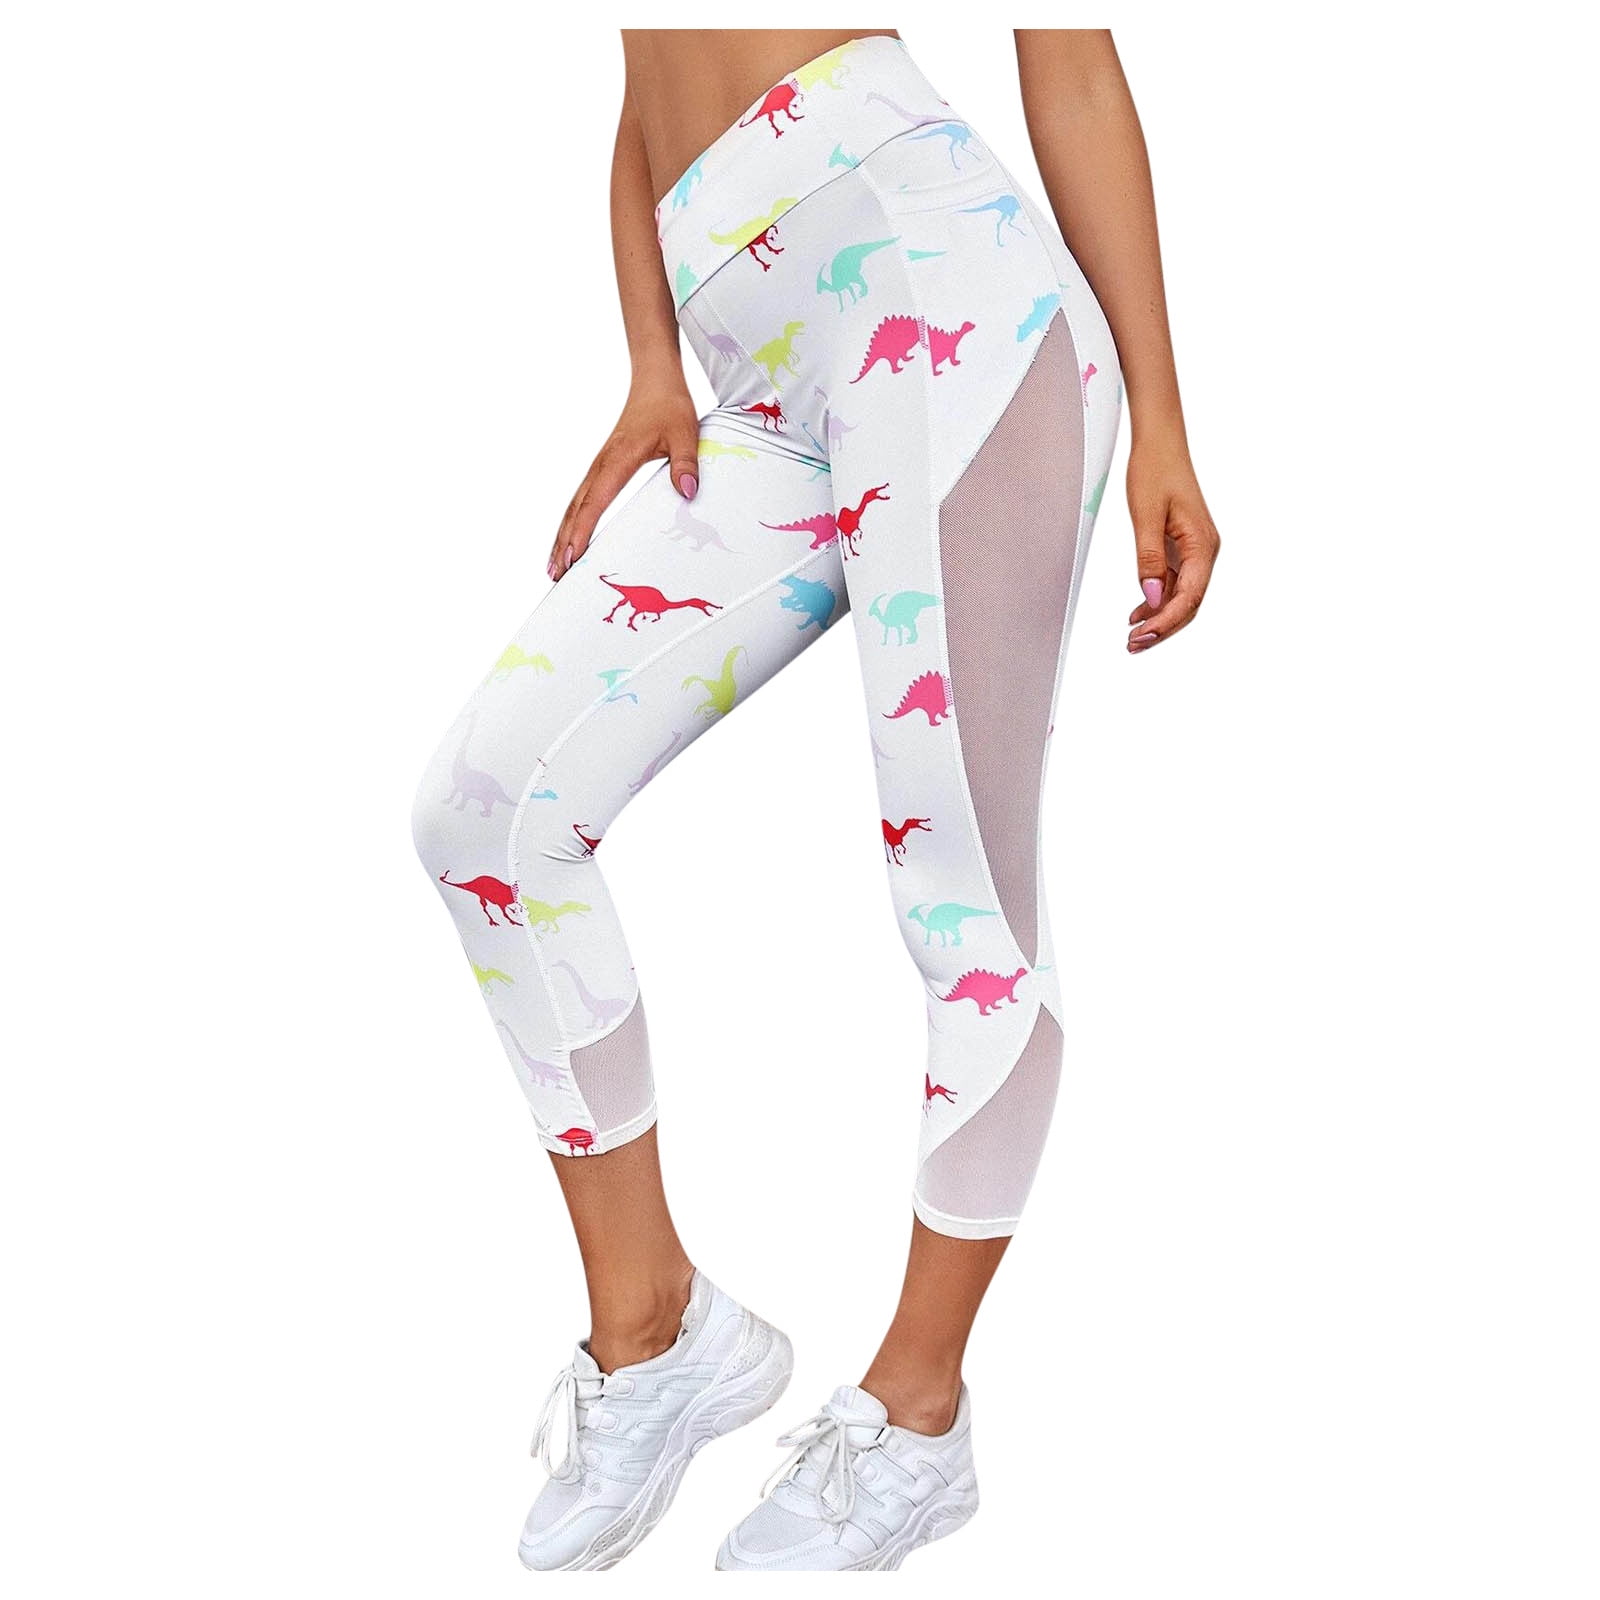 Details about   Women Floral Gym Sport Fitness Shorts Print Skinny Yoga Hot Pants Beach Leggings 